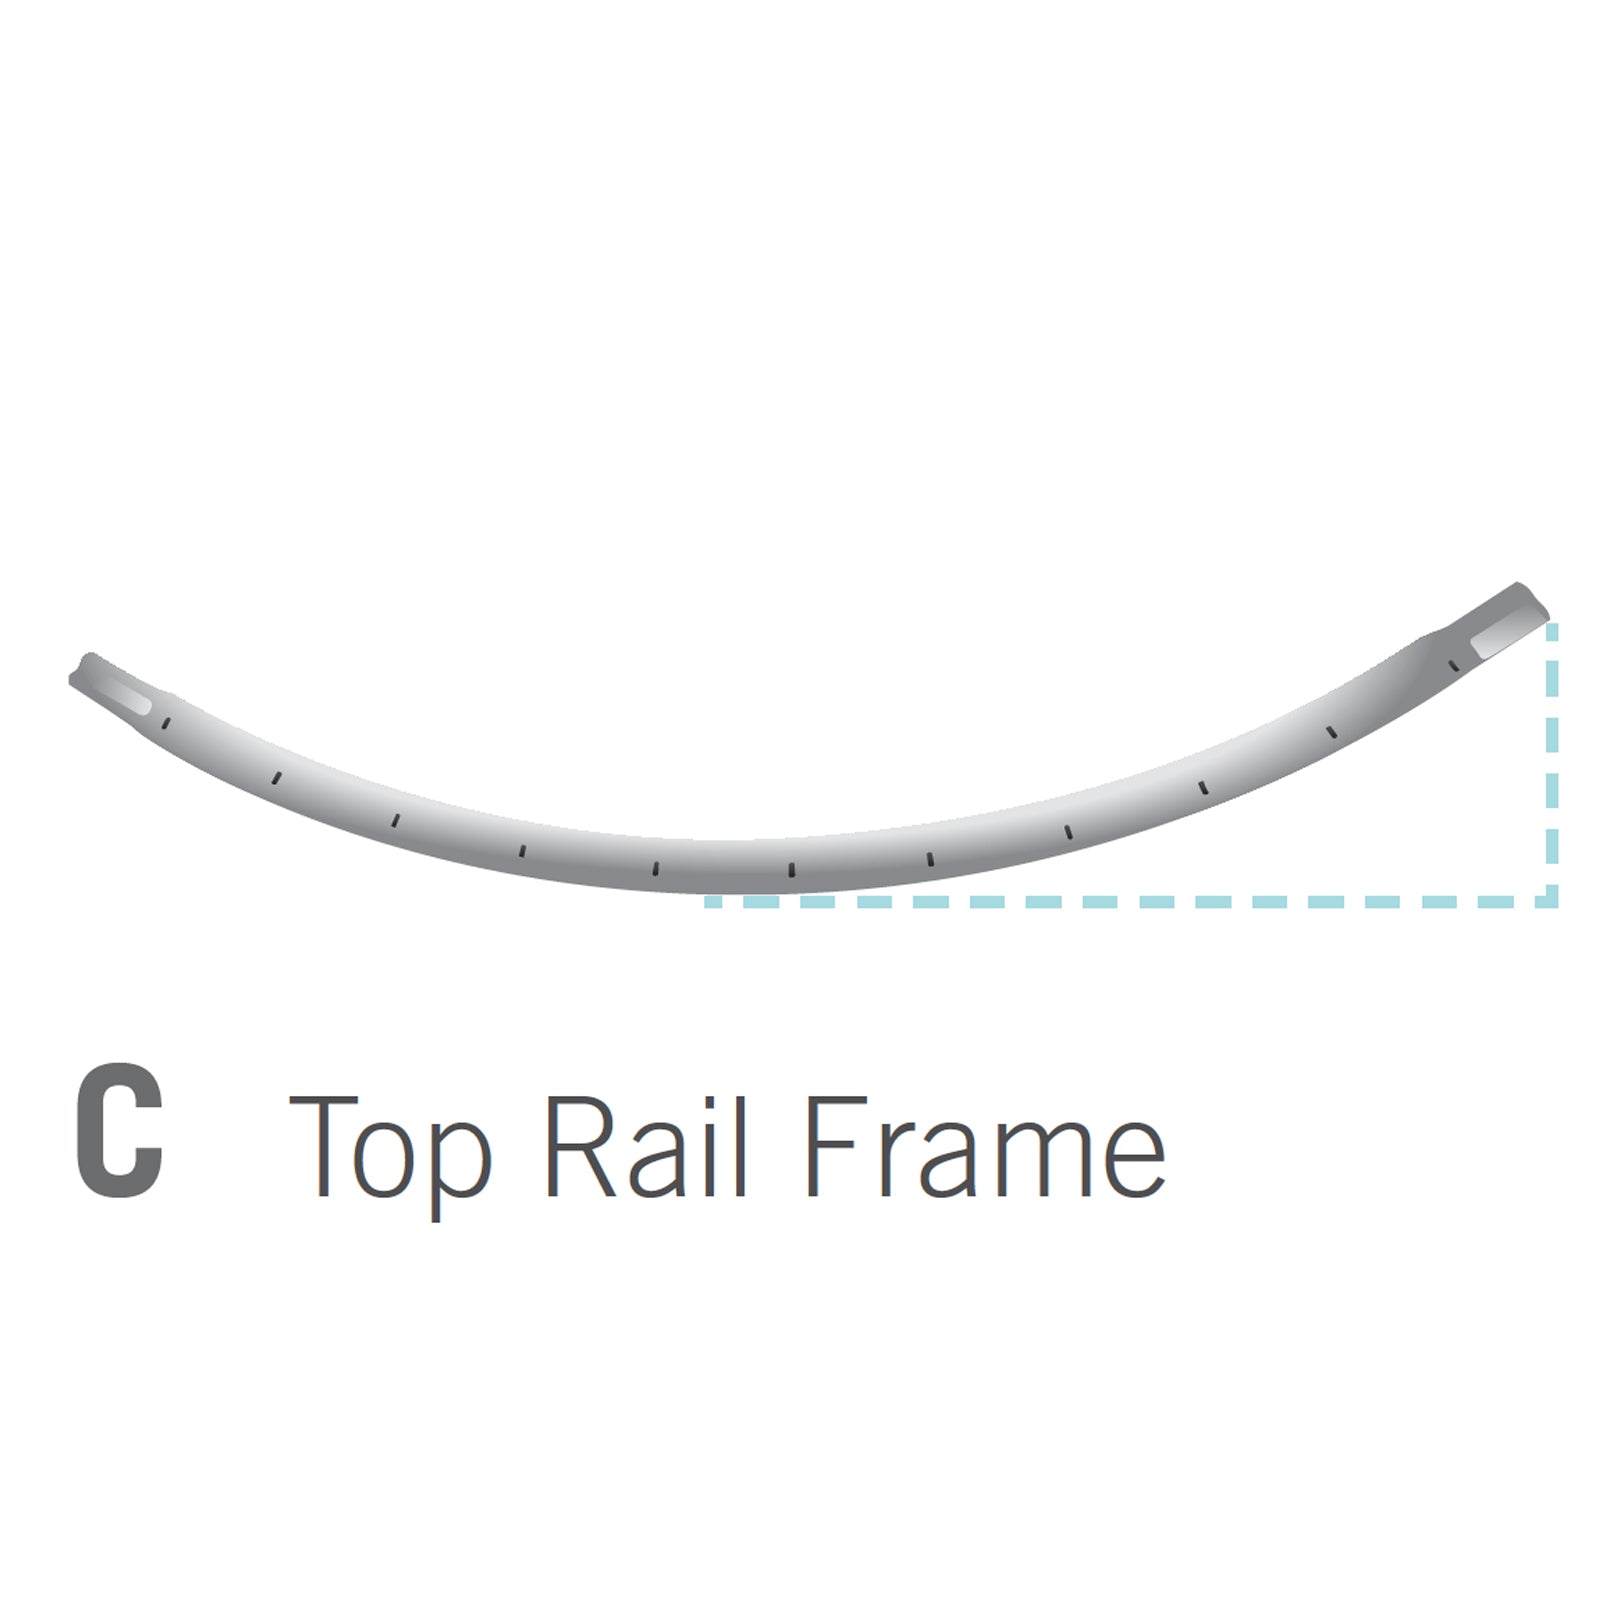 Top Rail for 11x16 foot Orion Trampoline (Part C).